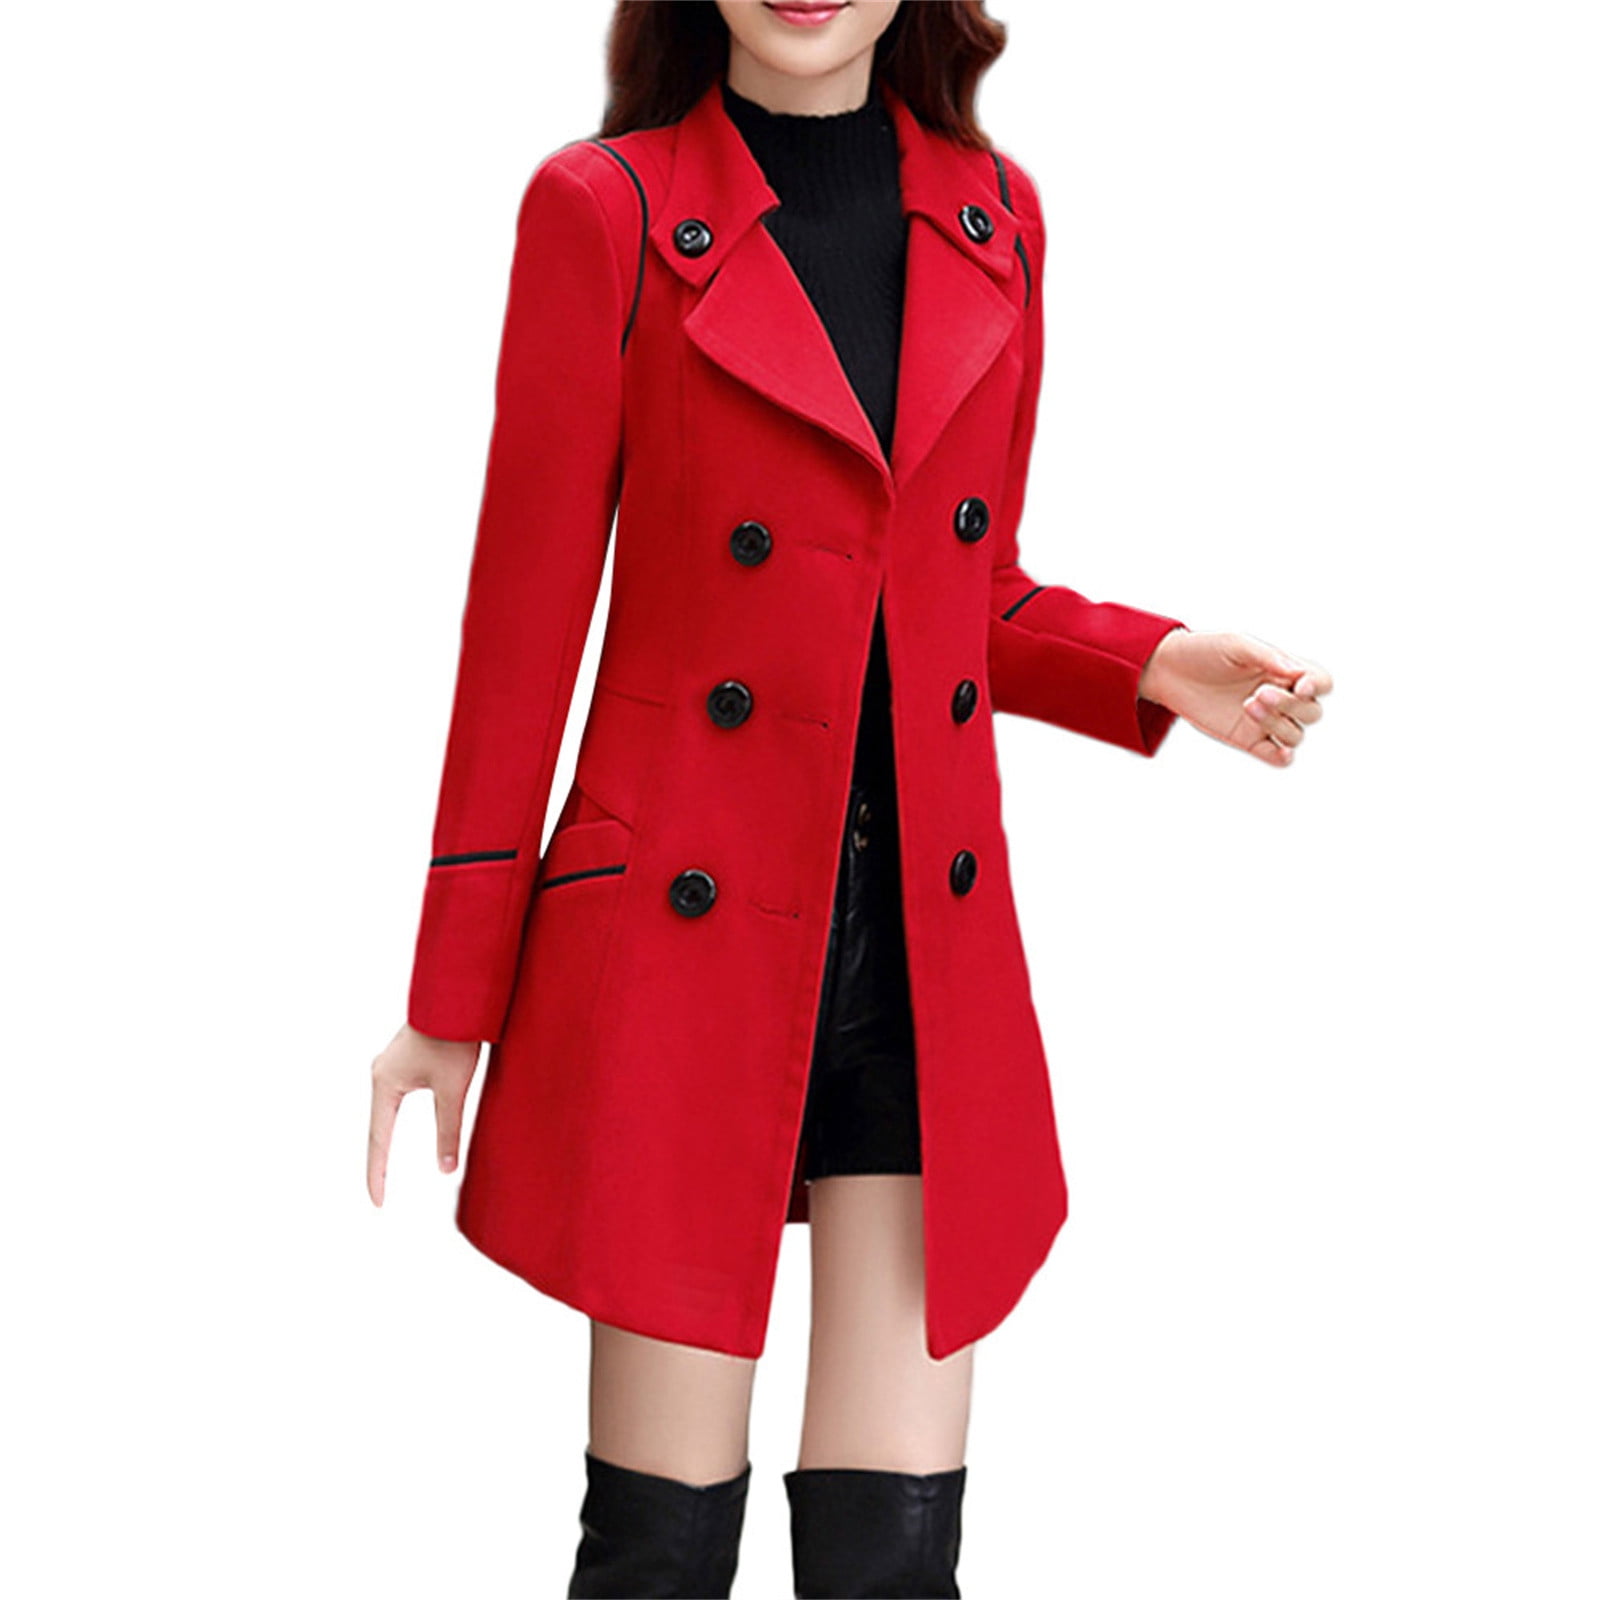 Buy CURLBIUTY Women's Pea Coat Double Breasted A Line Long Trench Coat  Winter Dress Coat with Pockets, Red, XX-Large at